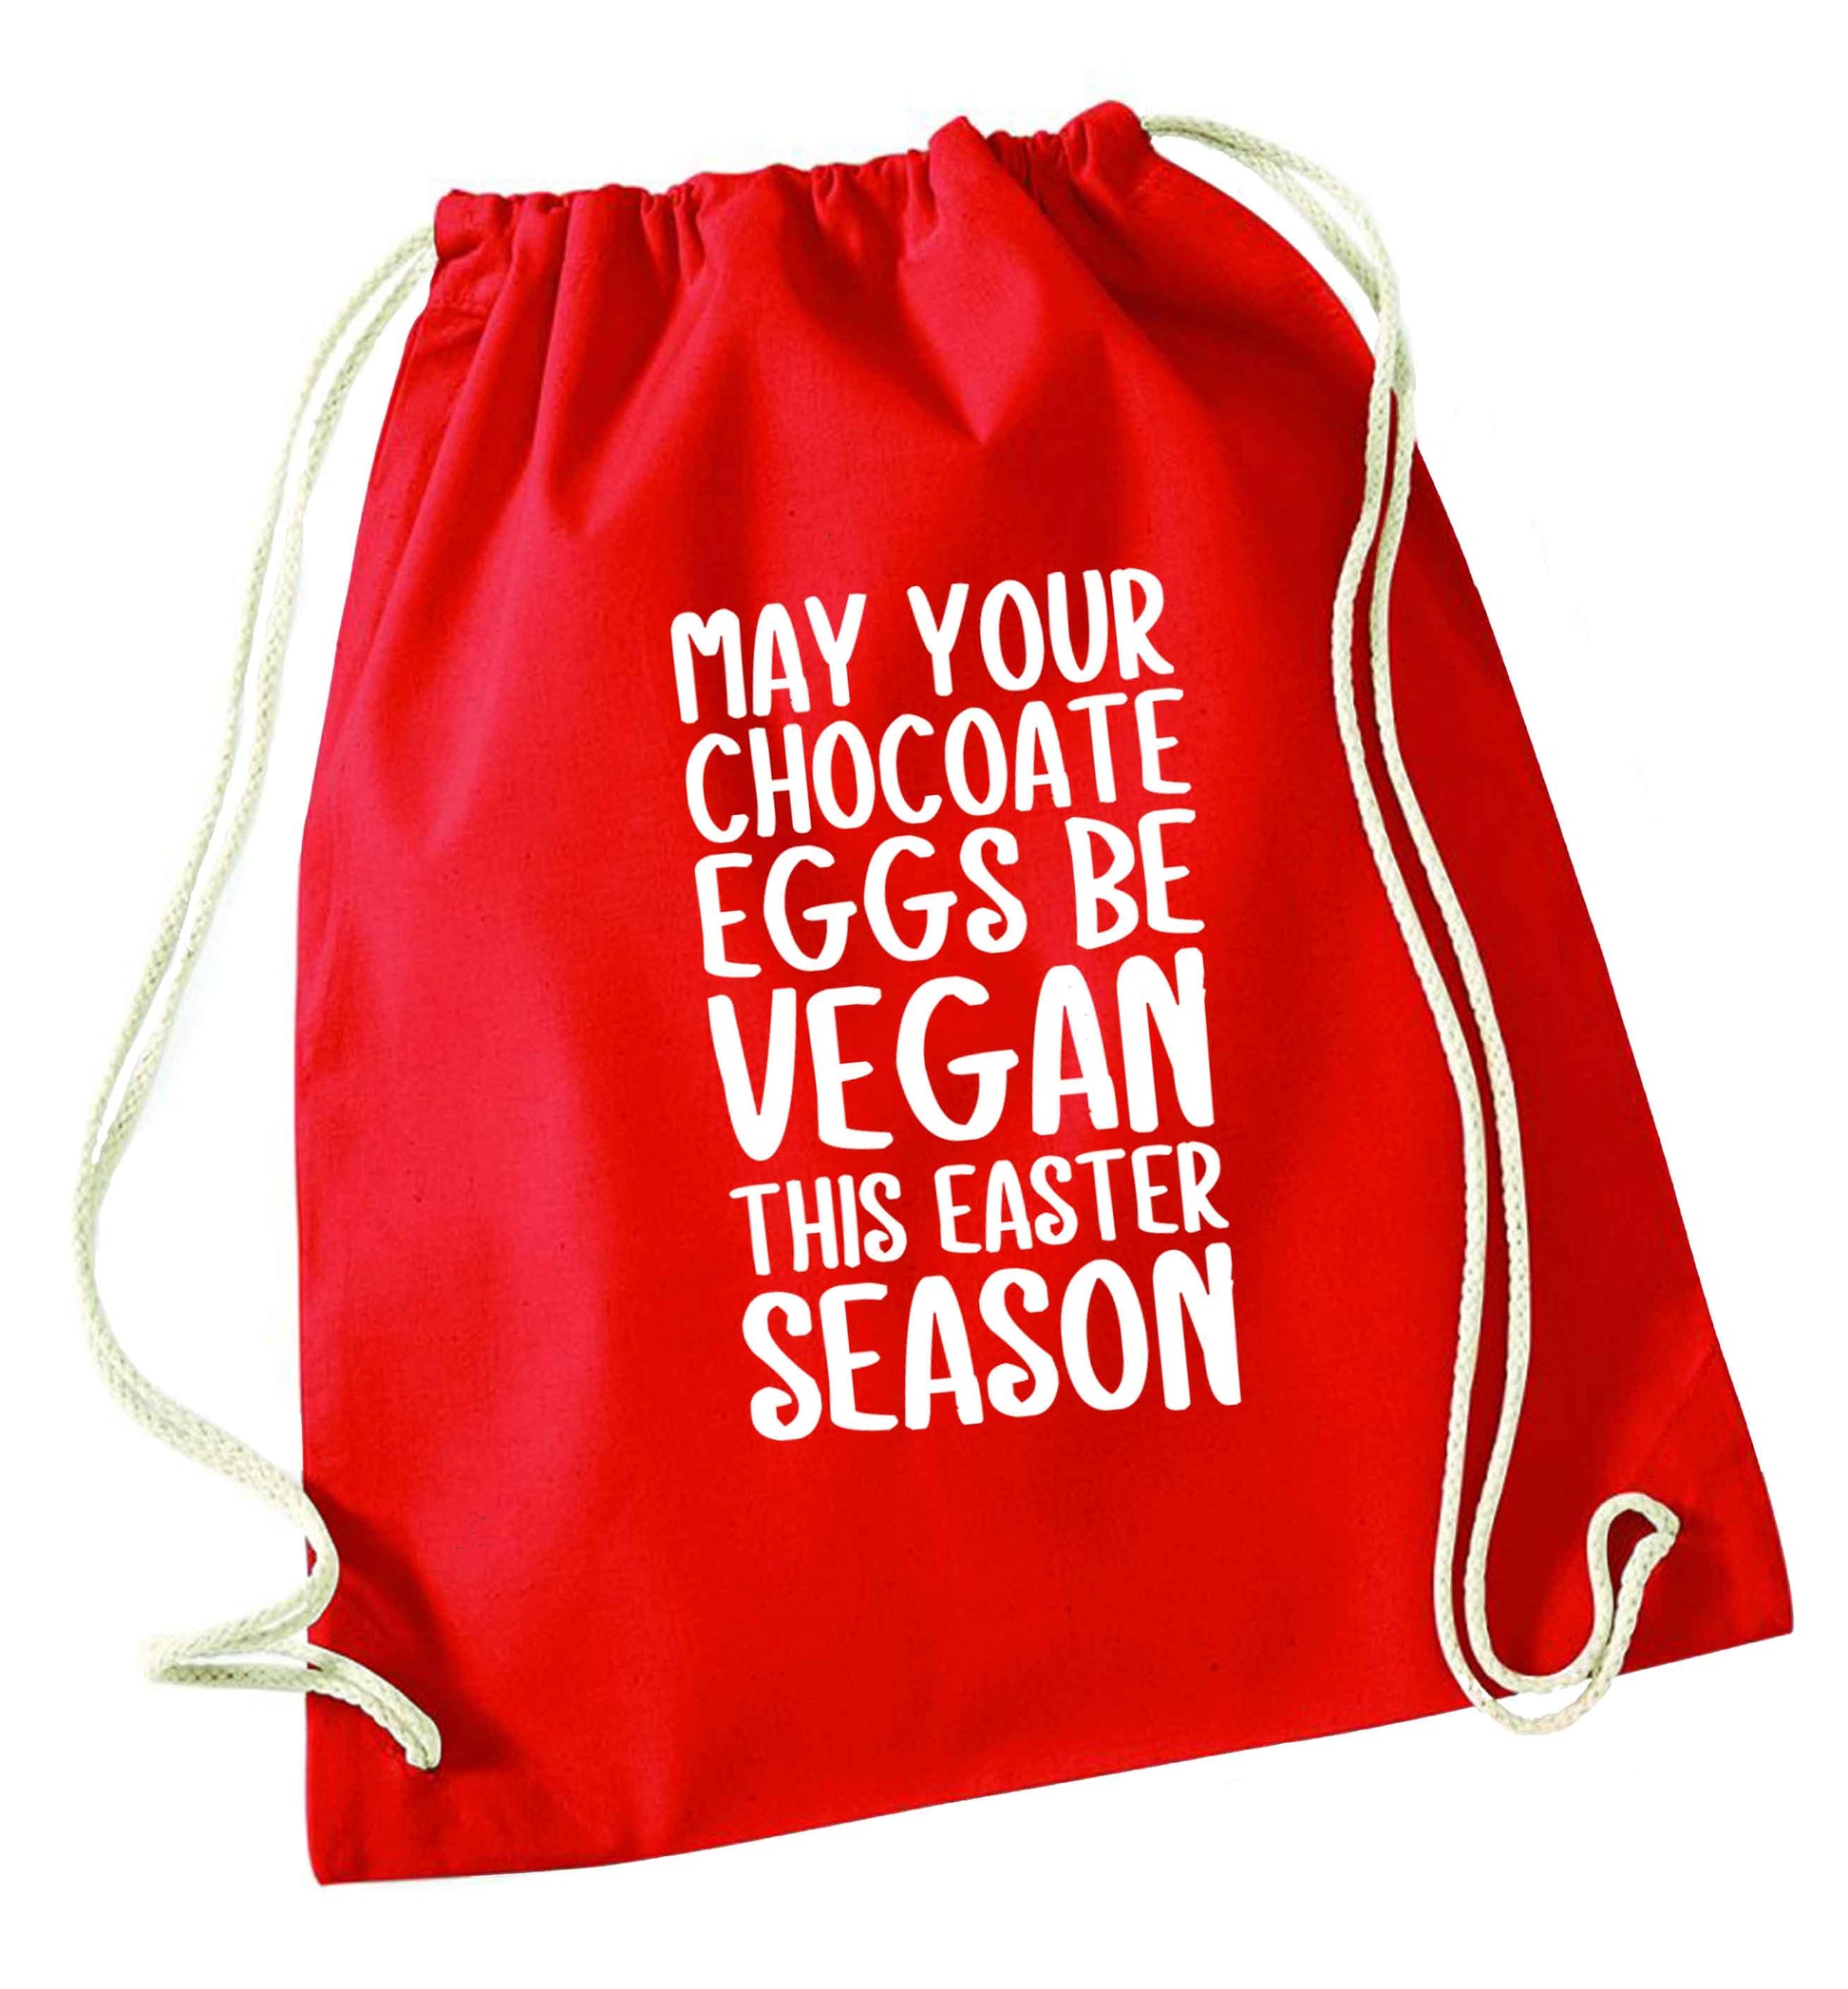 Easter bunny approved! Vegans will love this easter themed red drawstring bag 